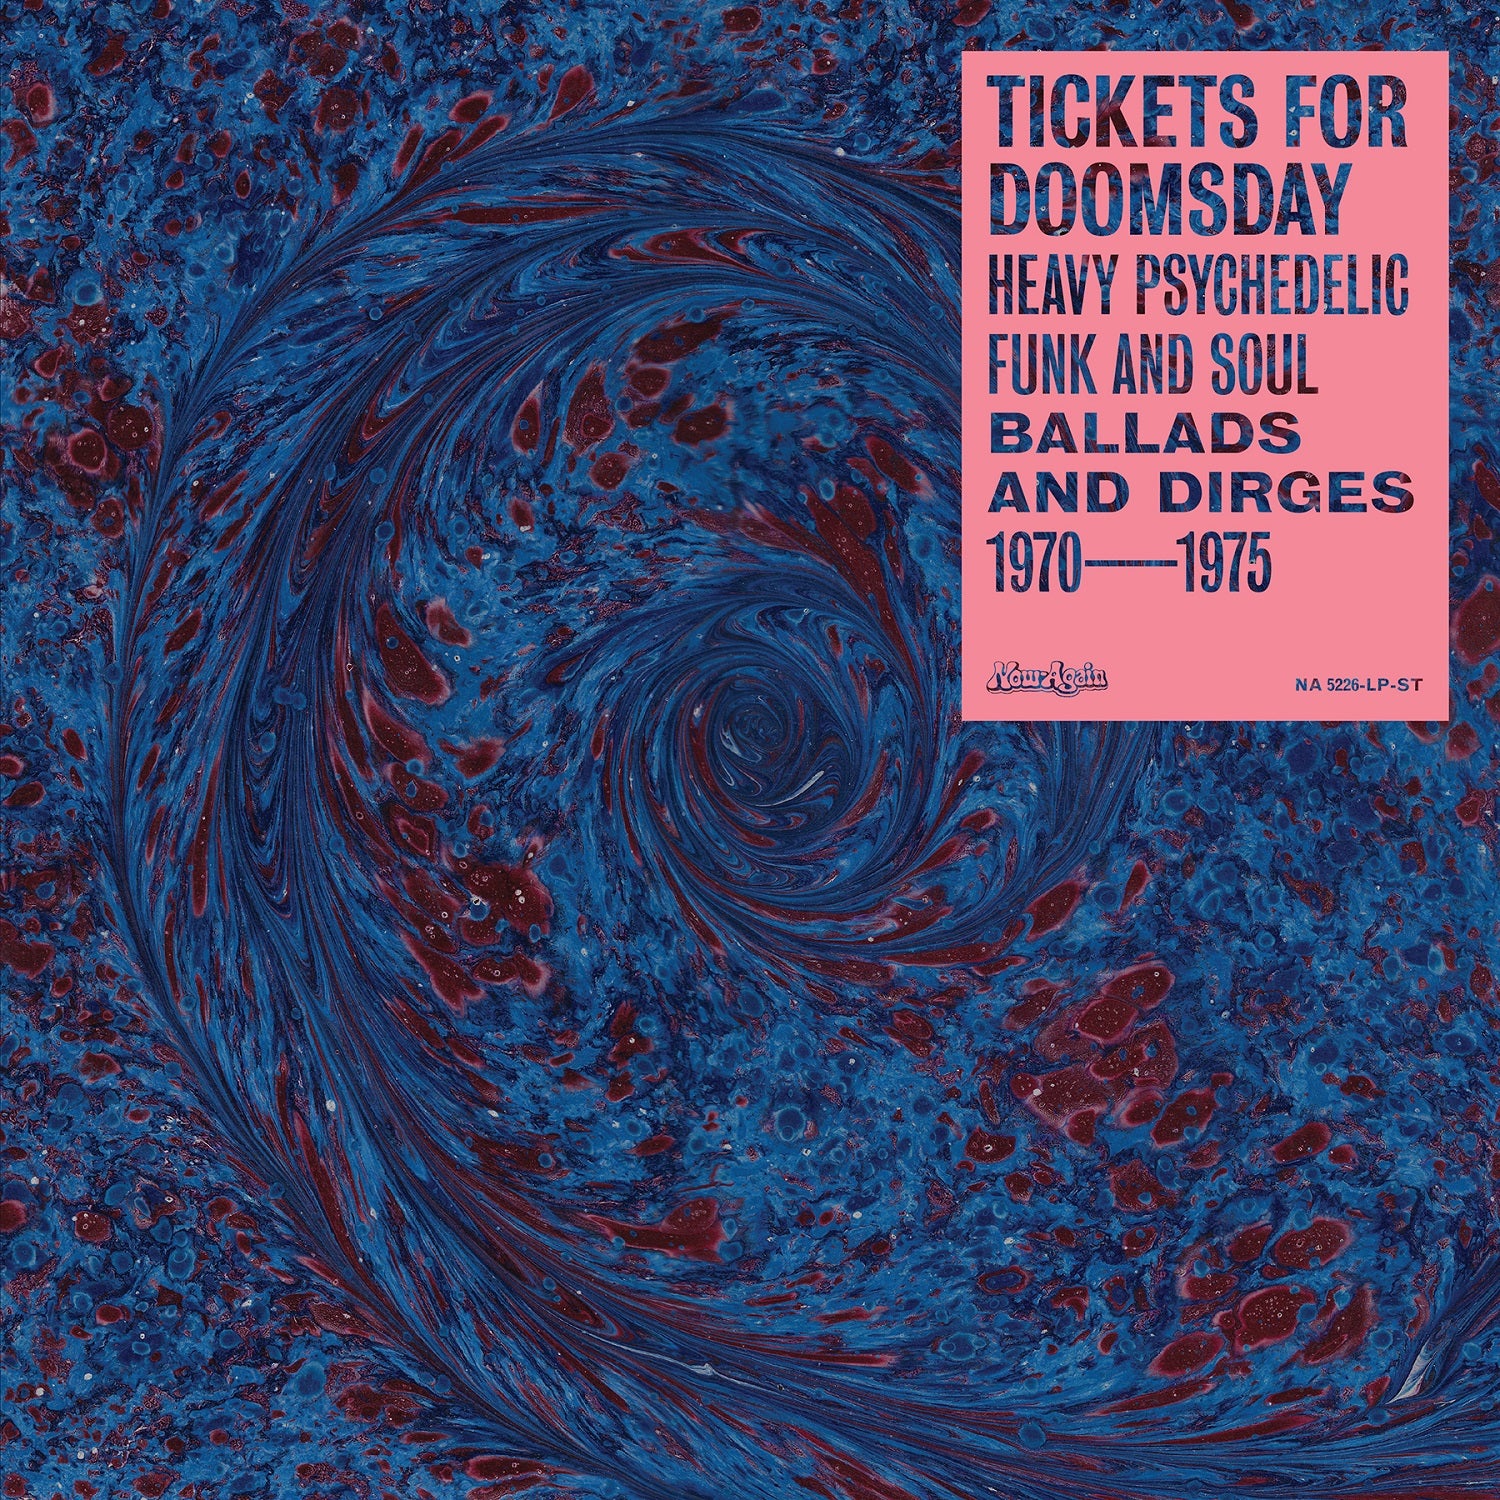 Various Artists - Tickets For Doomsday: Heavy Psychedelic Funk, Soul, Ballads & Dirges 1970-1975 LP (BF21)